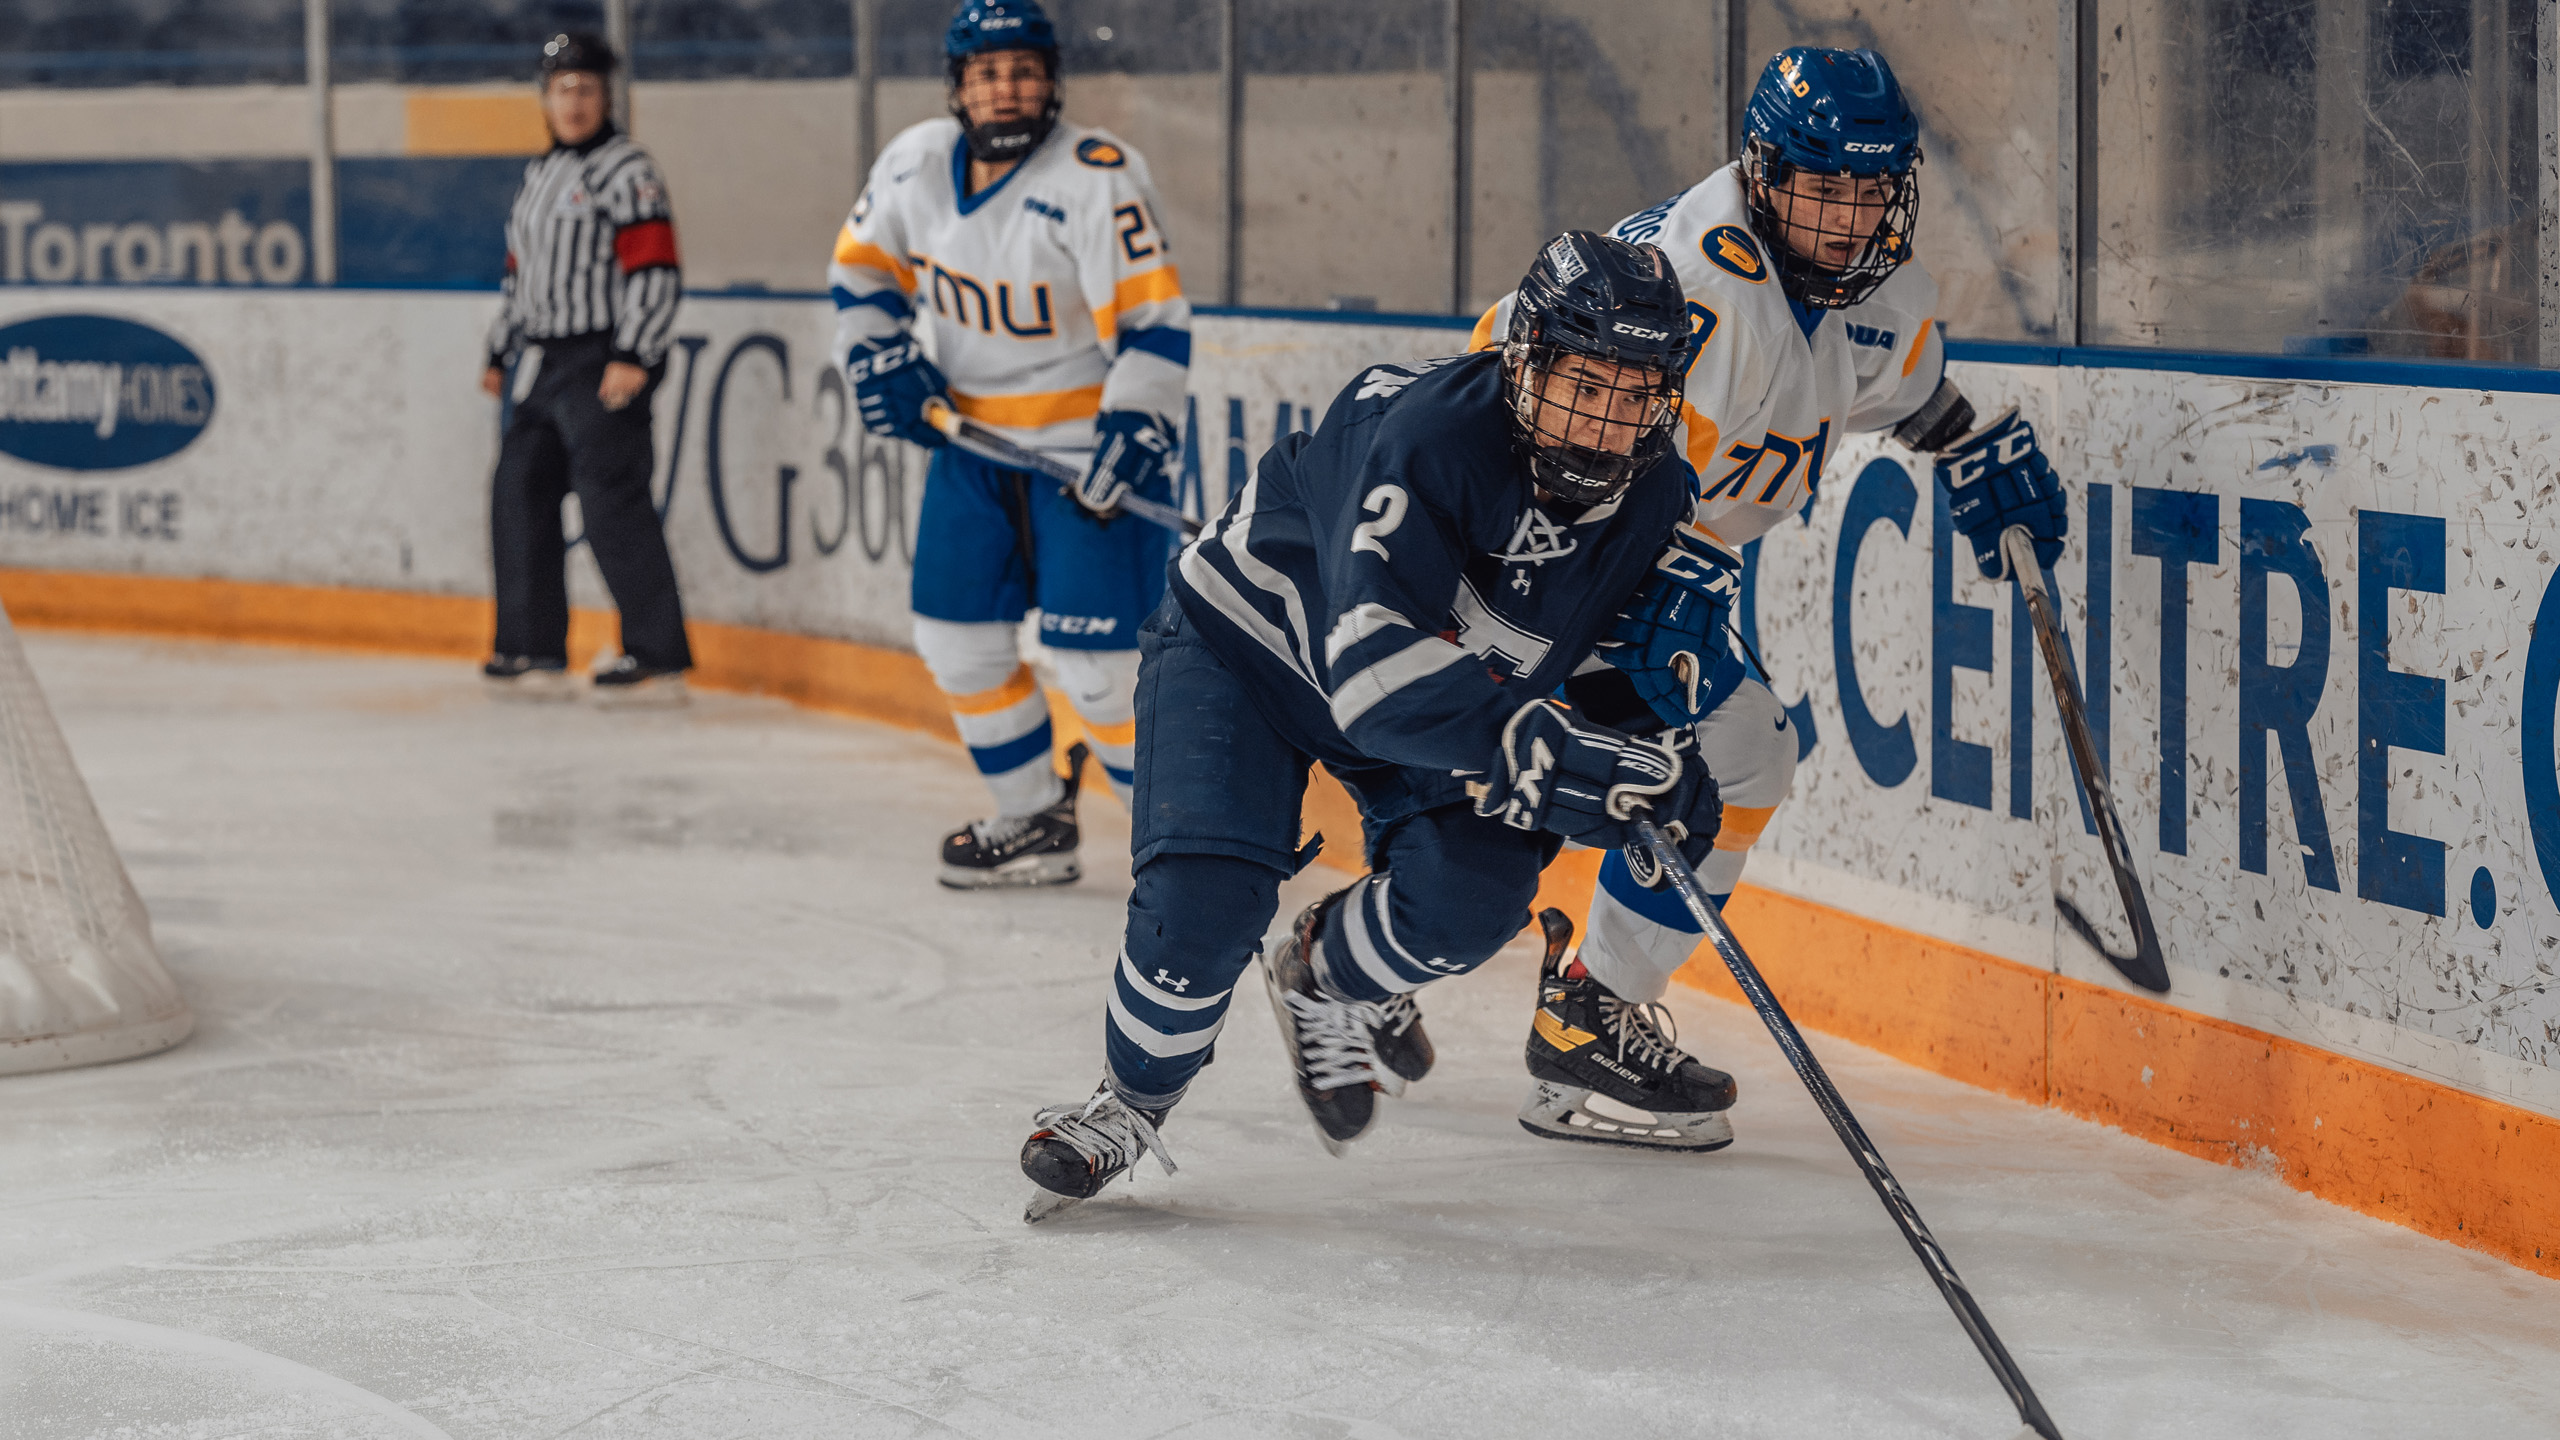 A U of T women's hockey player skates for a loose puck